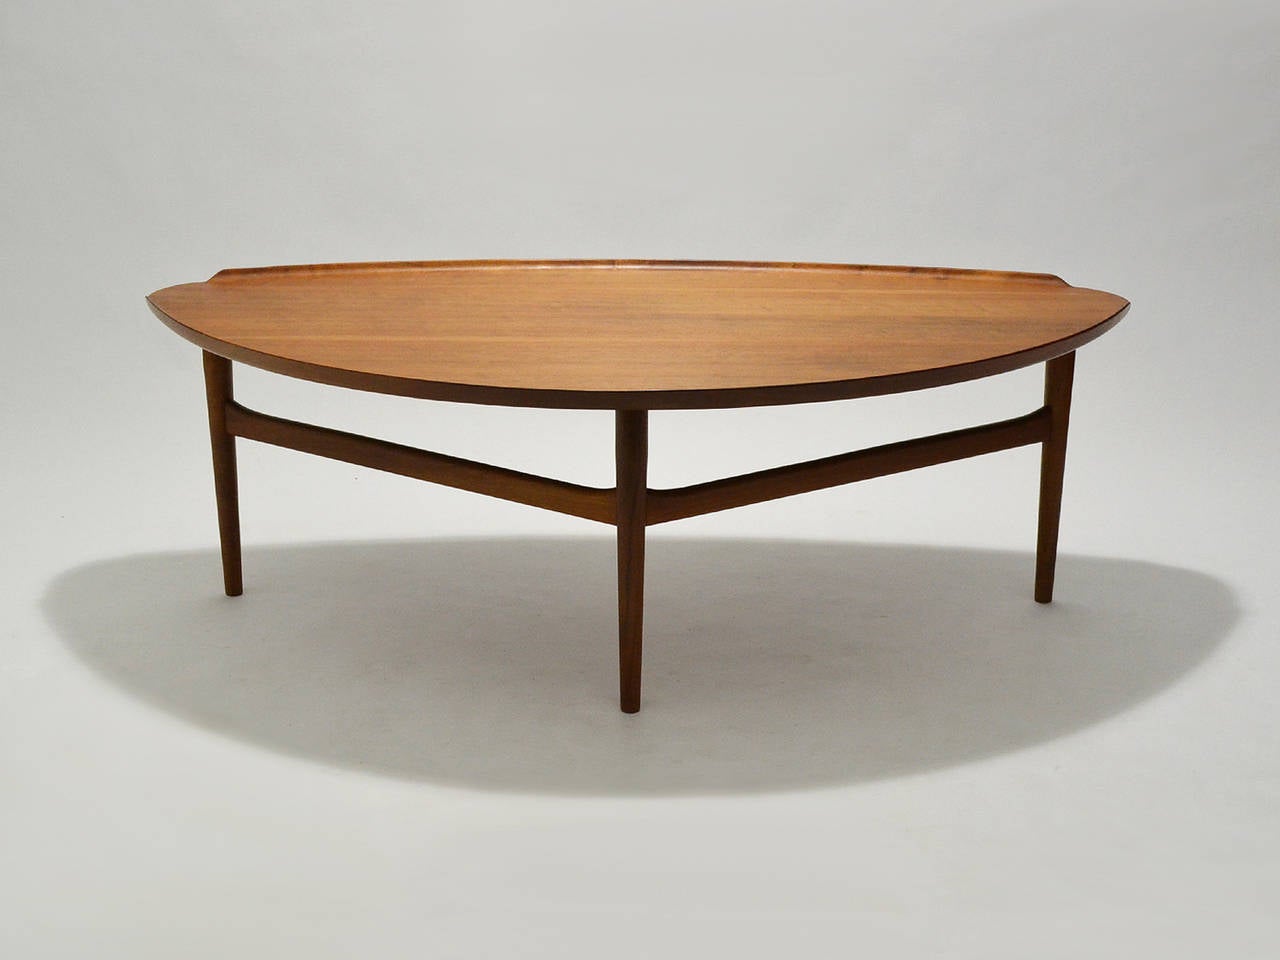 Designed by Danish master Finn Juhl and crafted by Baker Furniture in the US, this large coffee table is exquisite.

Finn Juhl was skeptical that any American manufacturer could produce his designs to his exacting standards. After visiting Baker